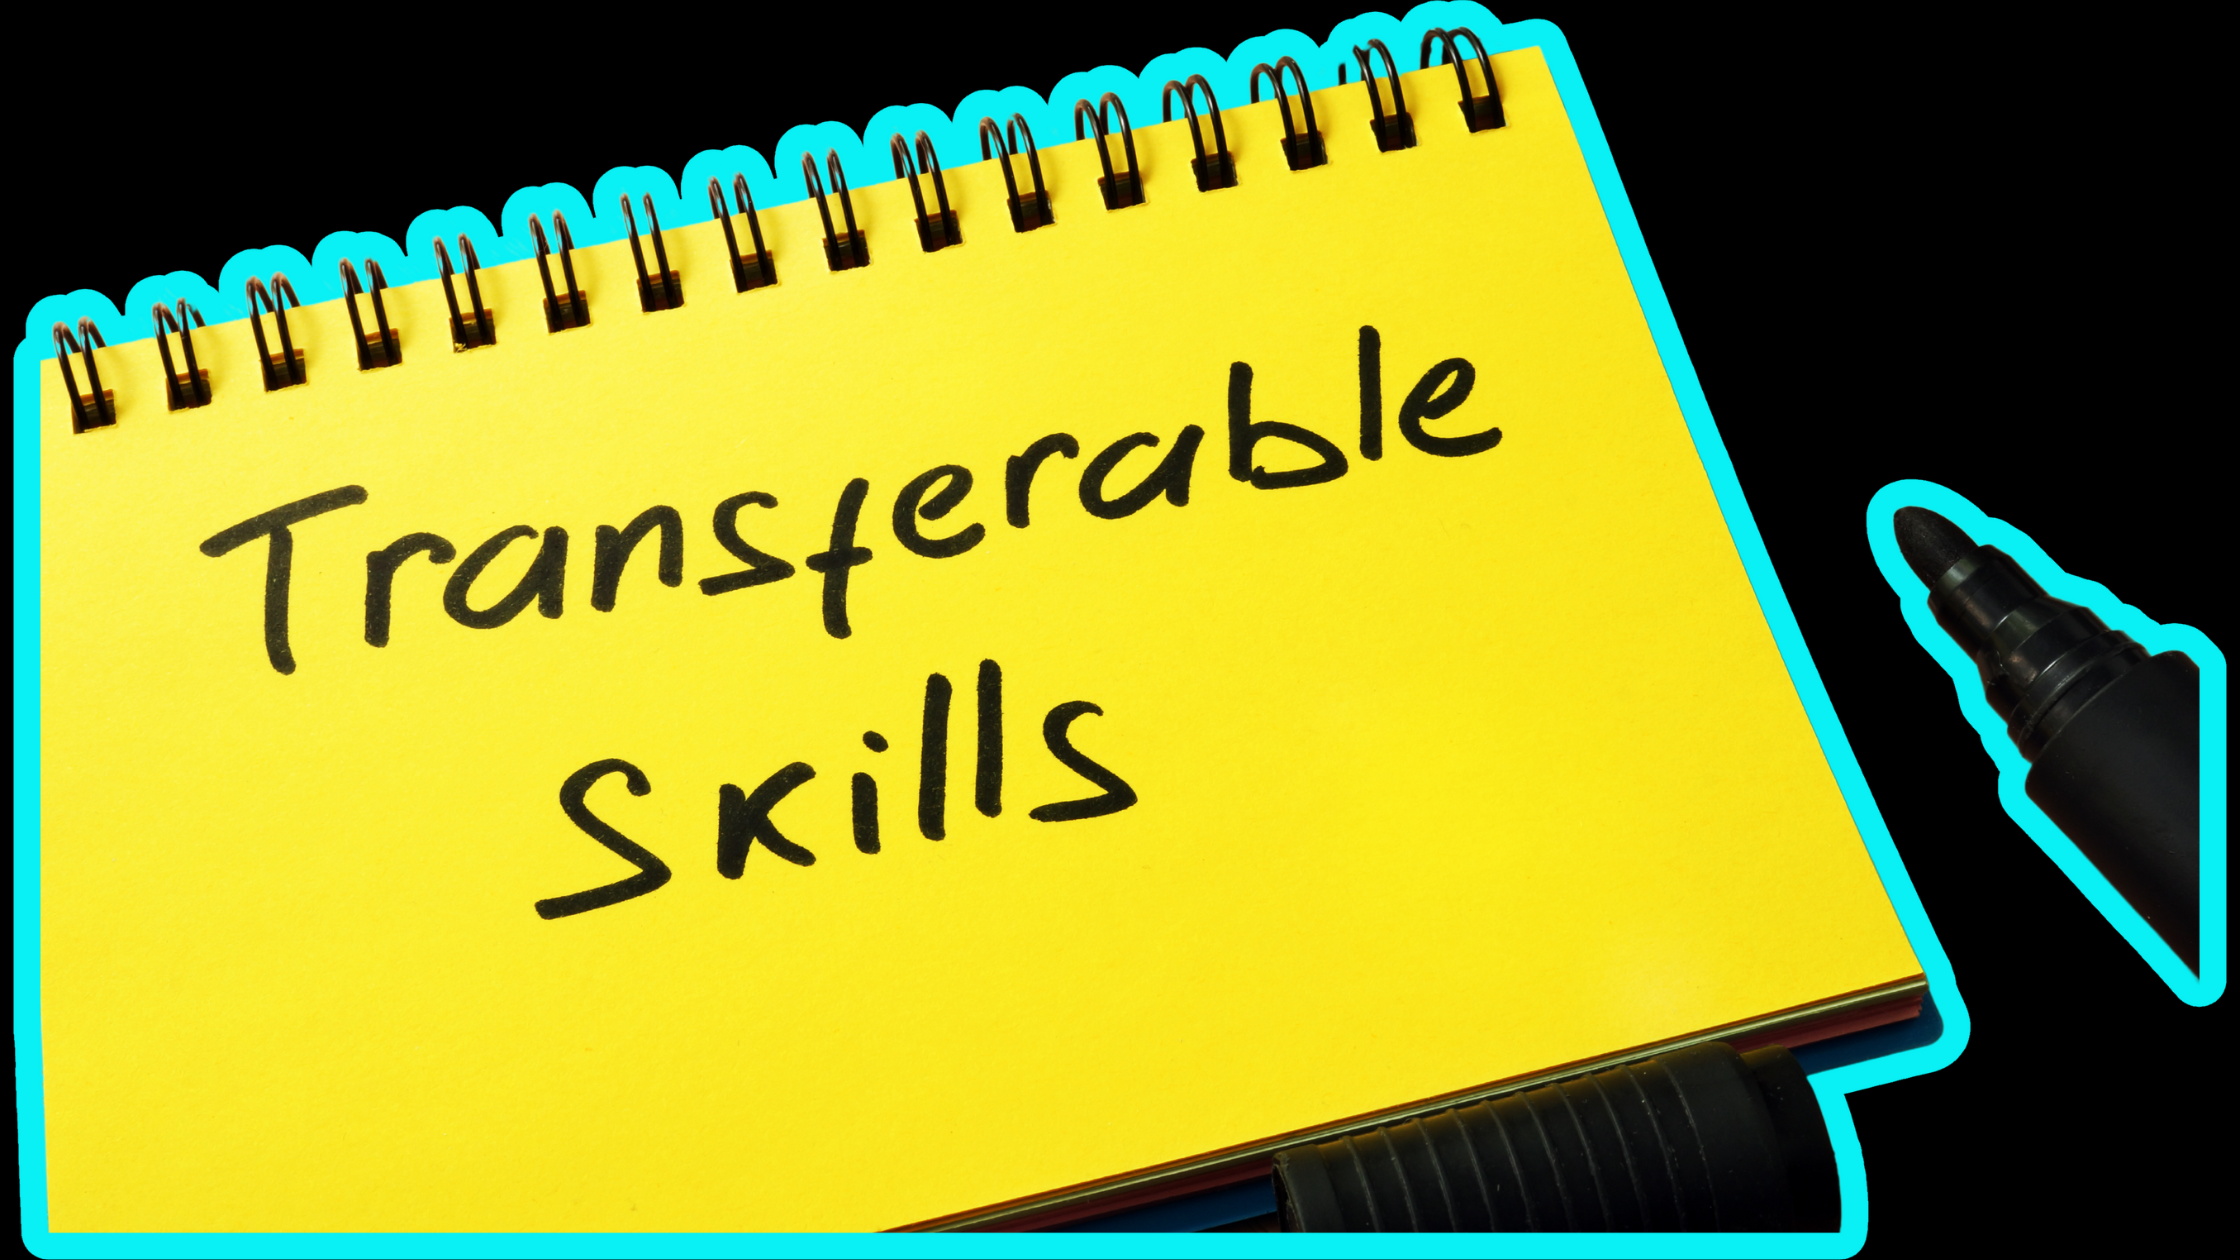 What Are Transferable Skills and Why Are They Important?